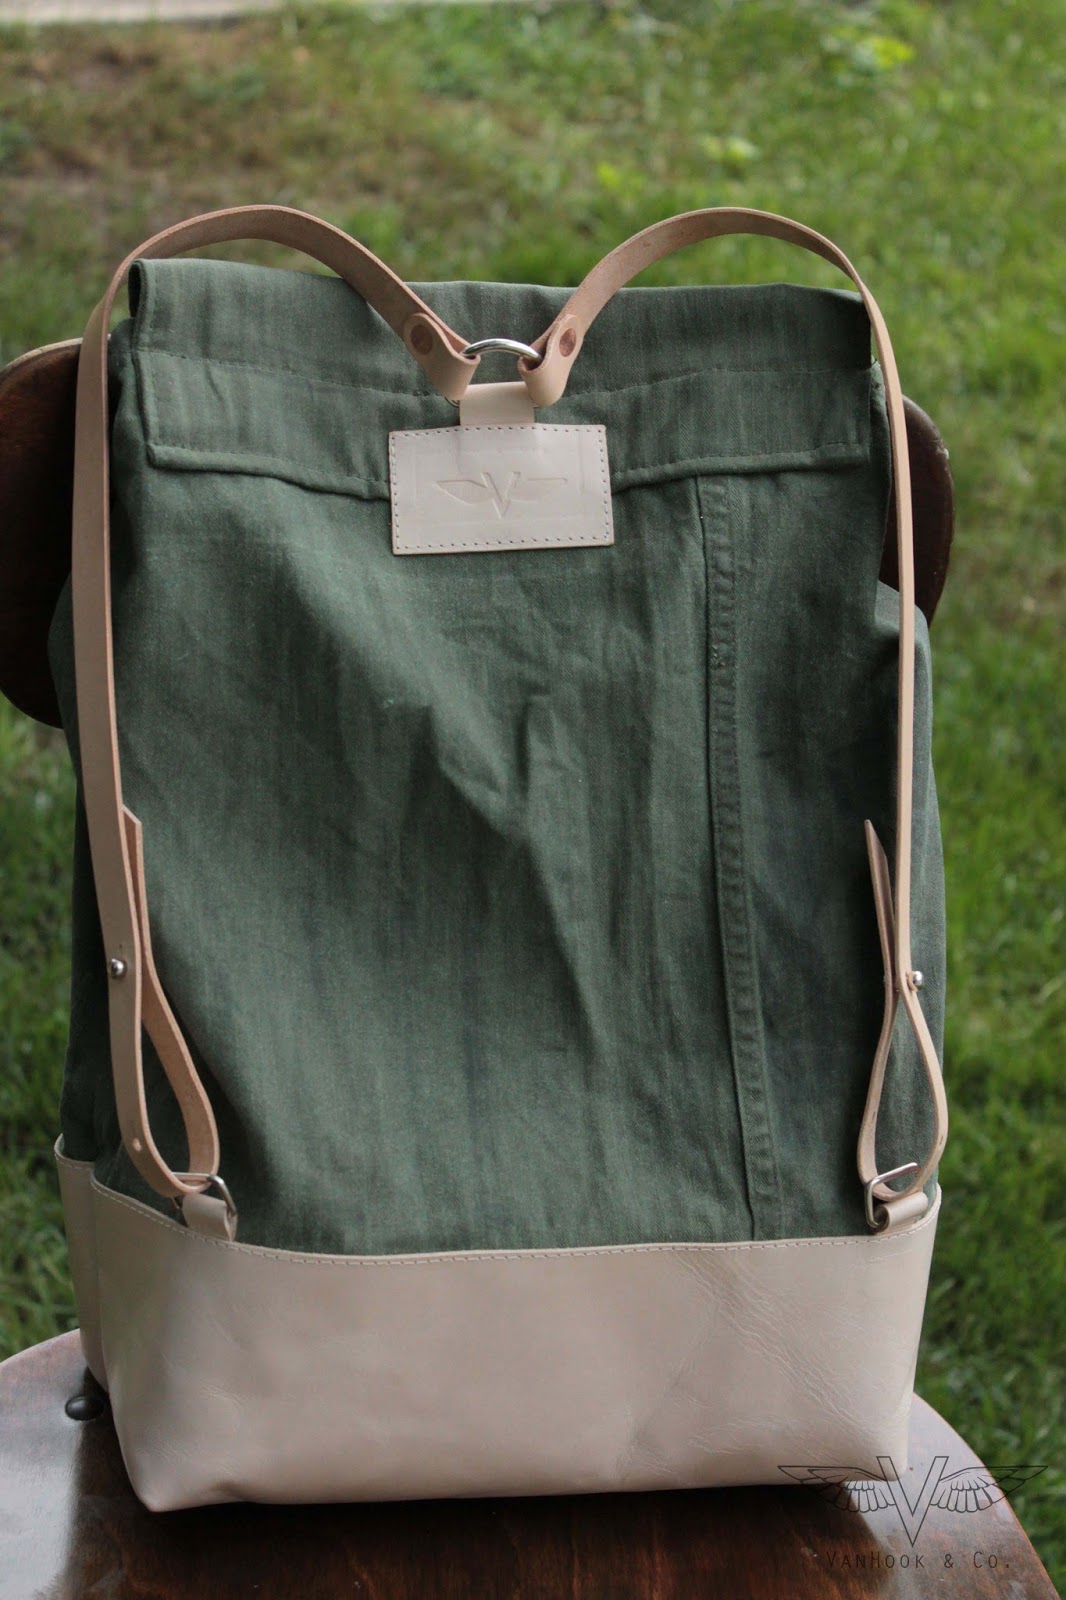 VanHook & Co.: Waxed Canvas & Leather Backpack